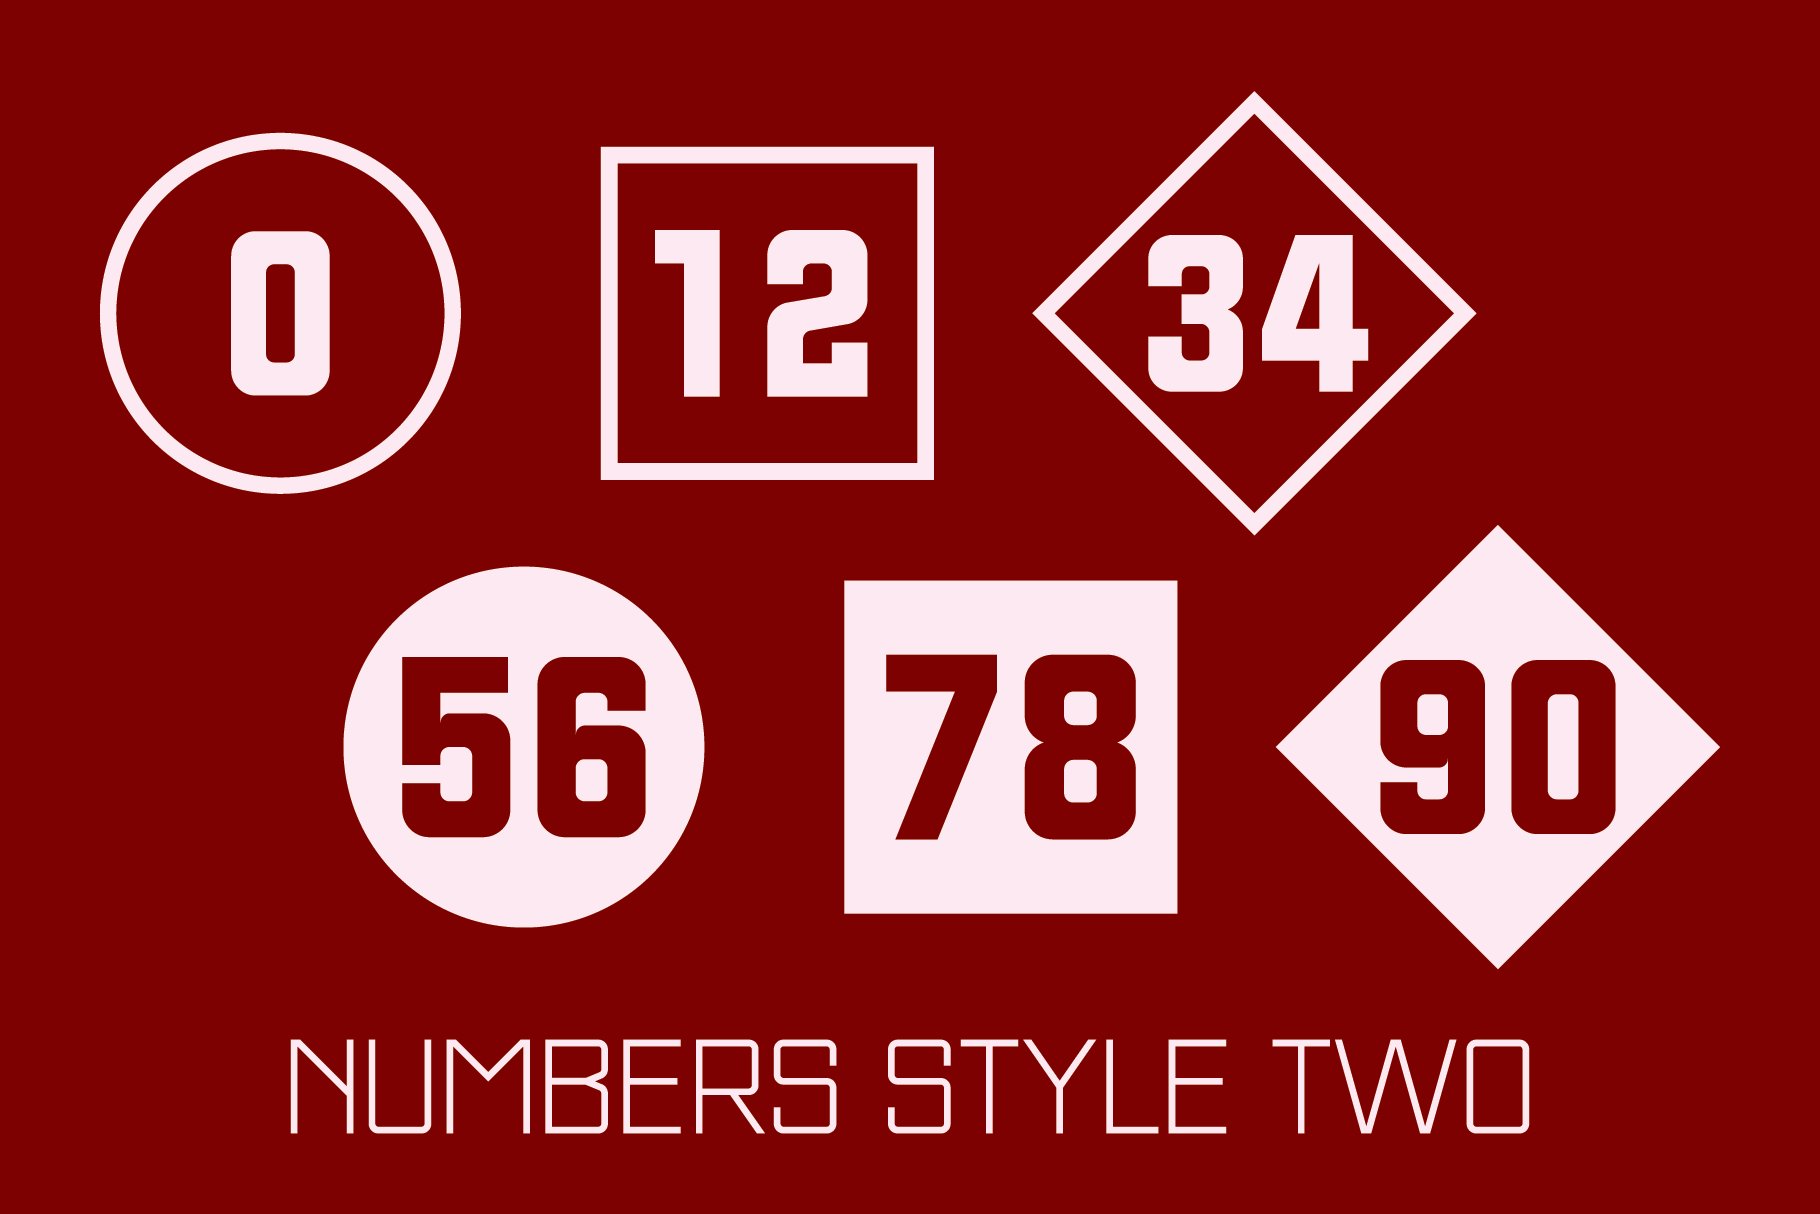 Numbers Style Two Fonts cover image.